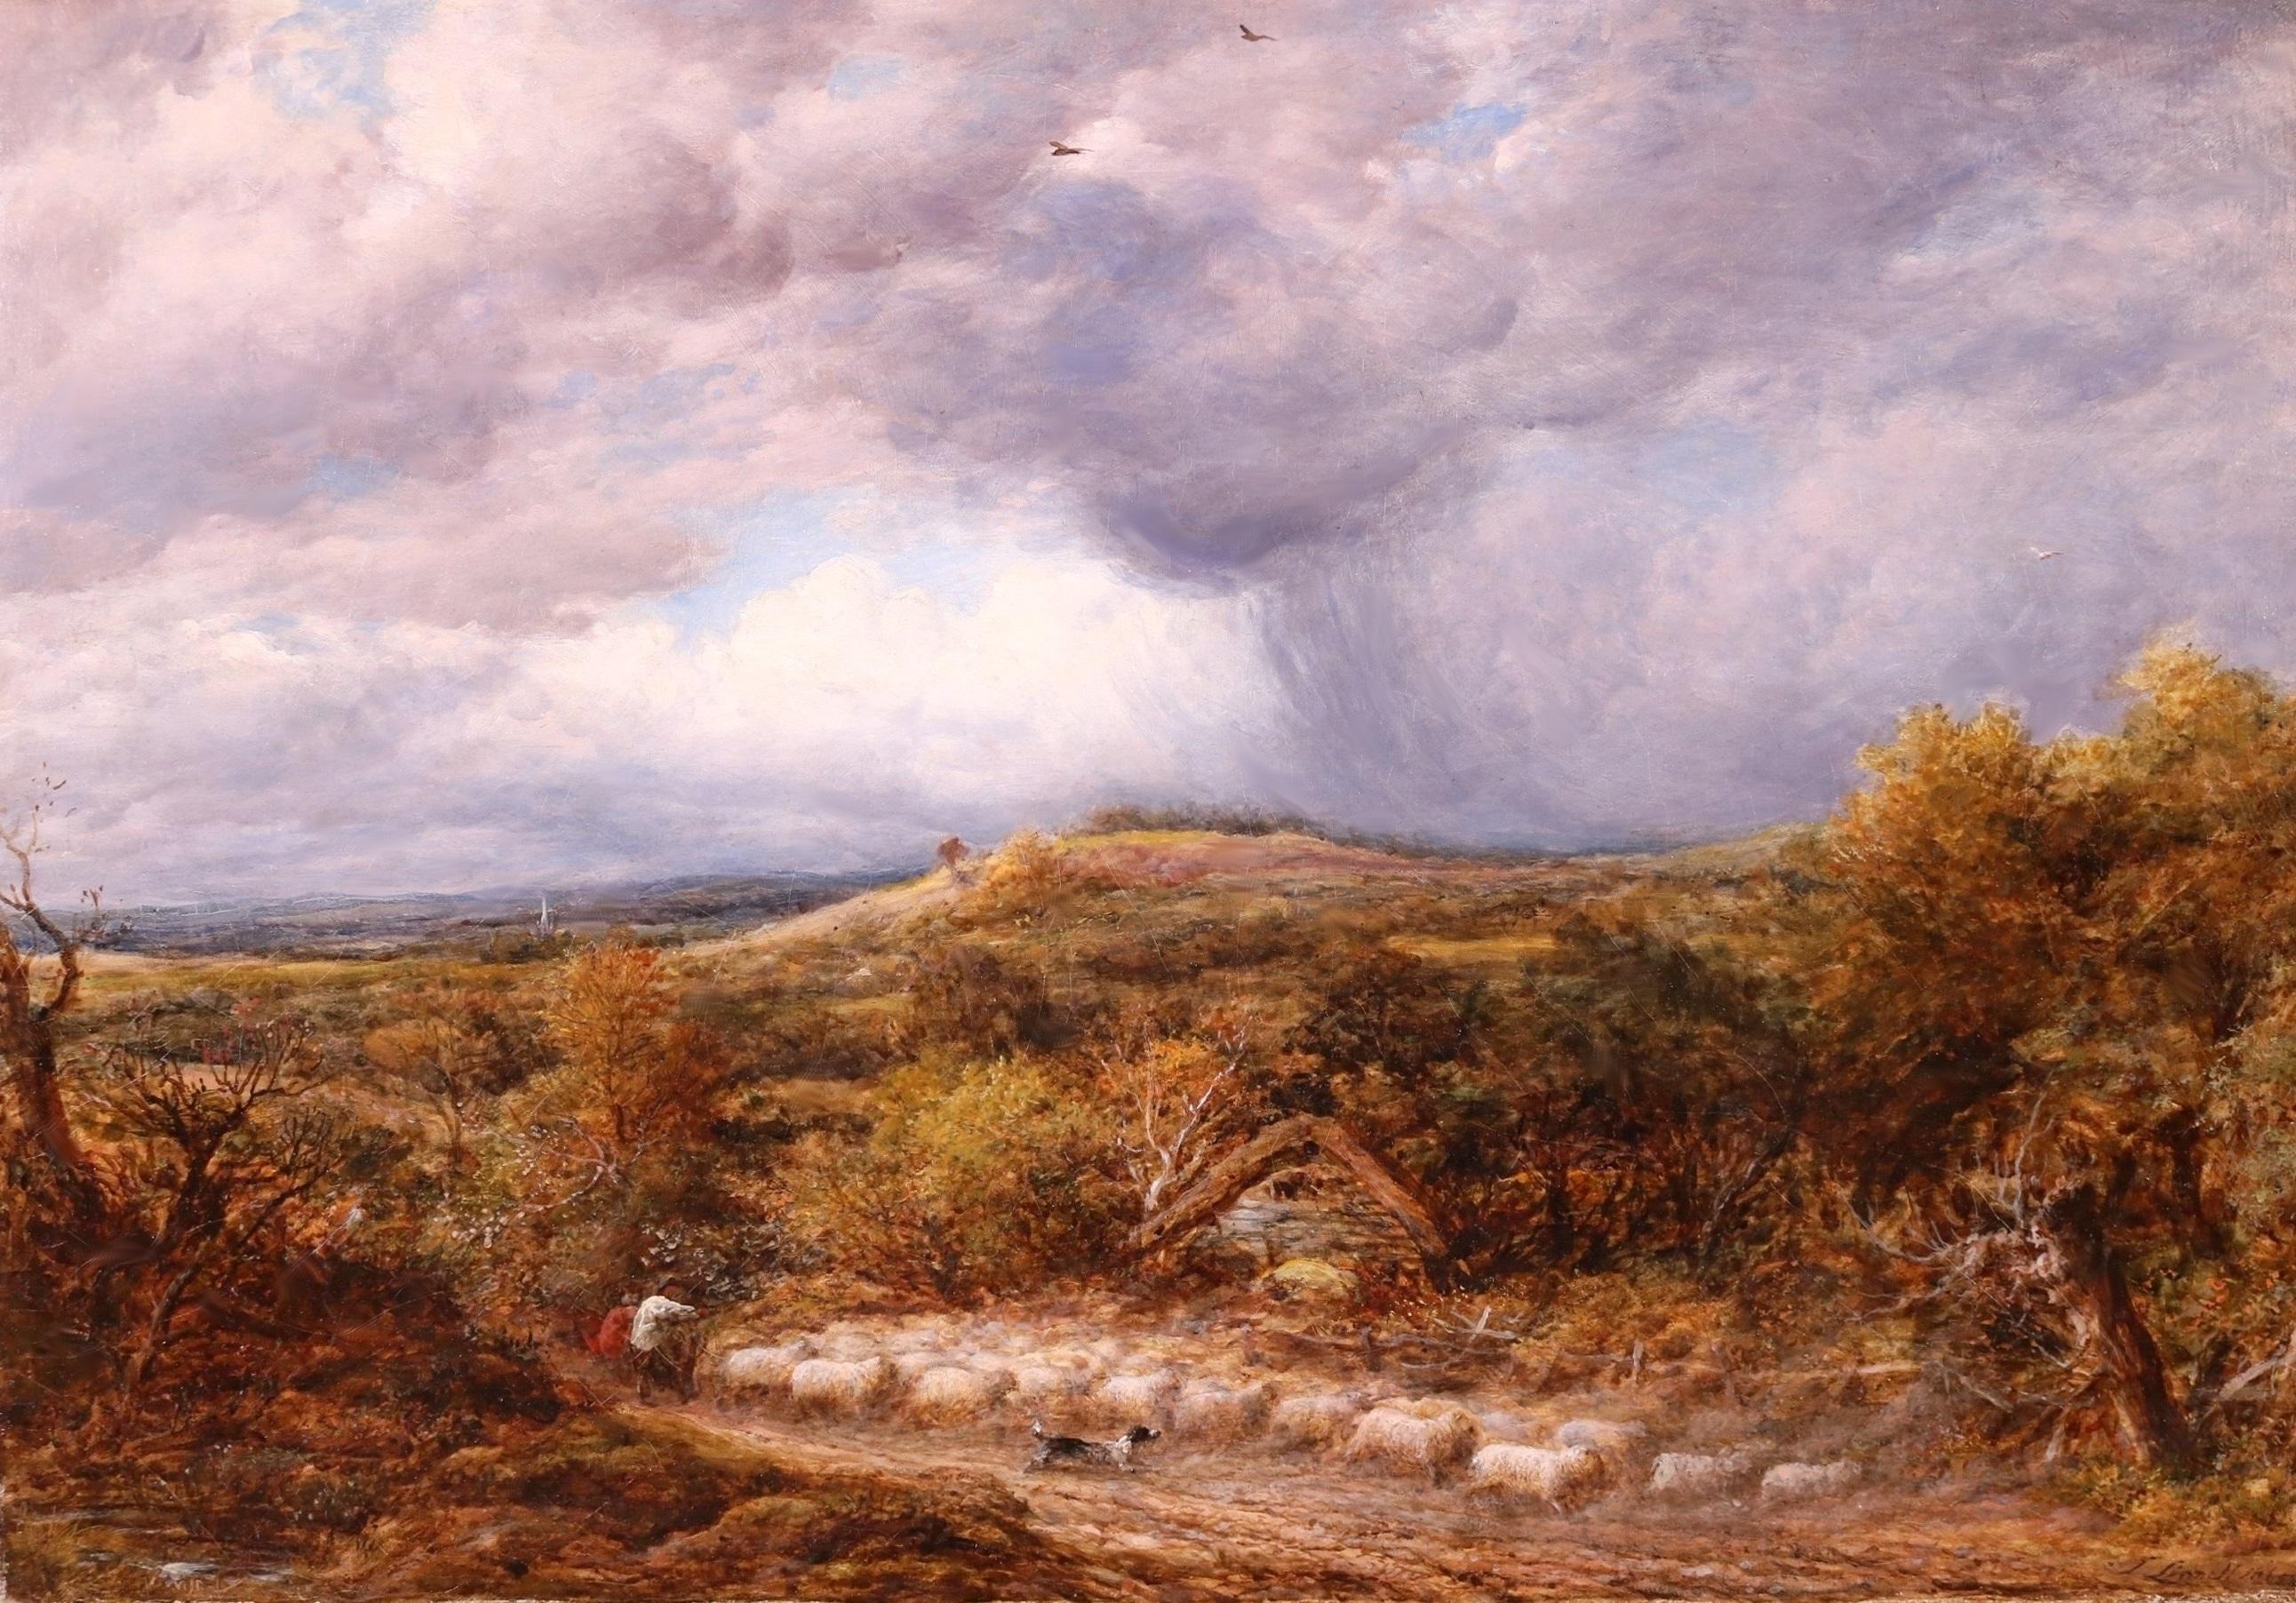 Shepherd & Sheep in Thunder Storm - Large 19th Century Oil Painting Landscape 1